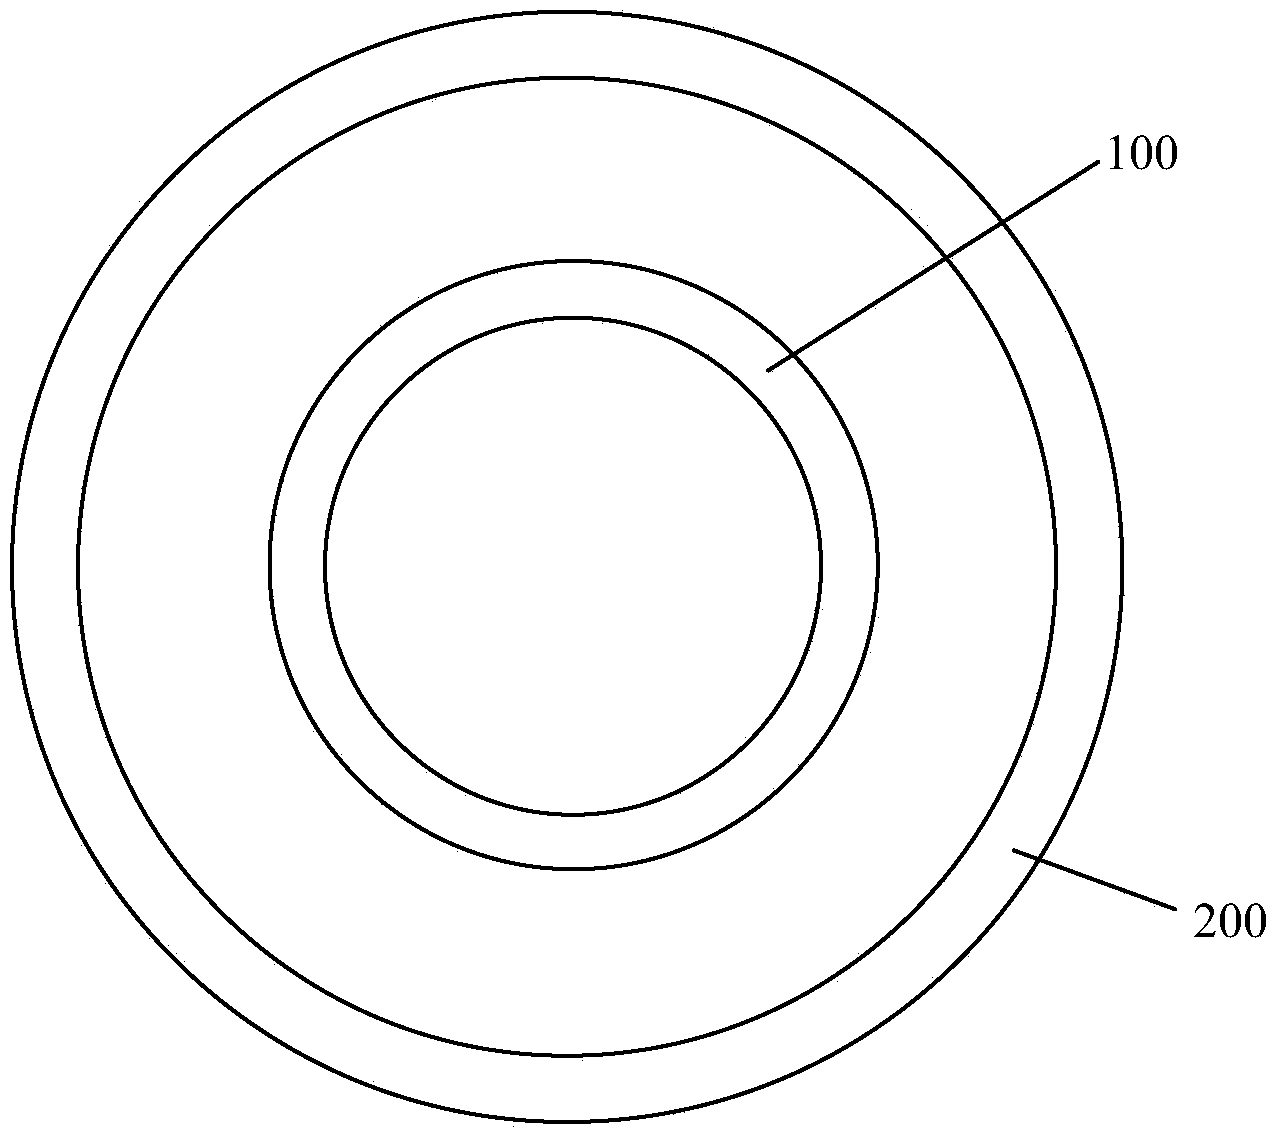 Air purification method and device based on electrostatic deflection